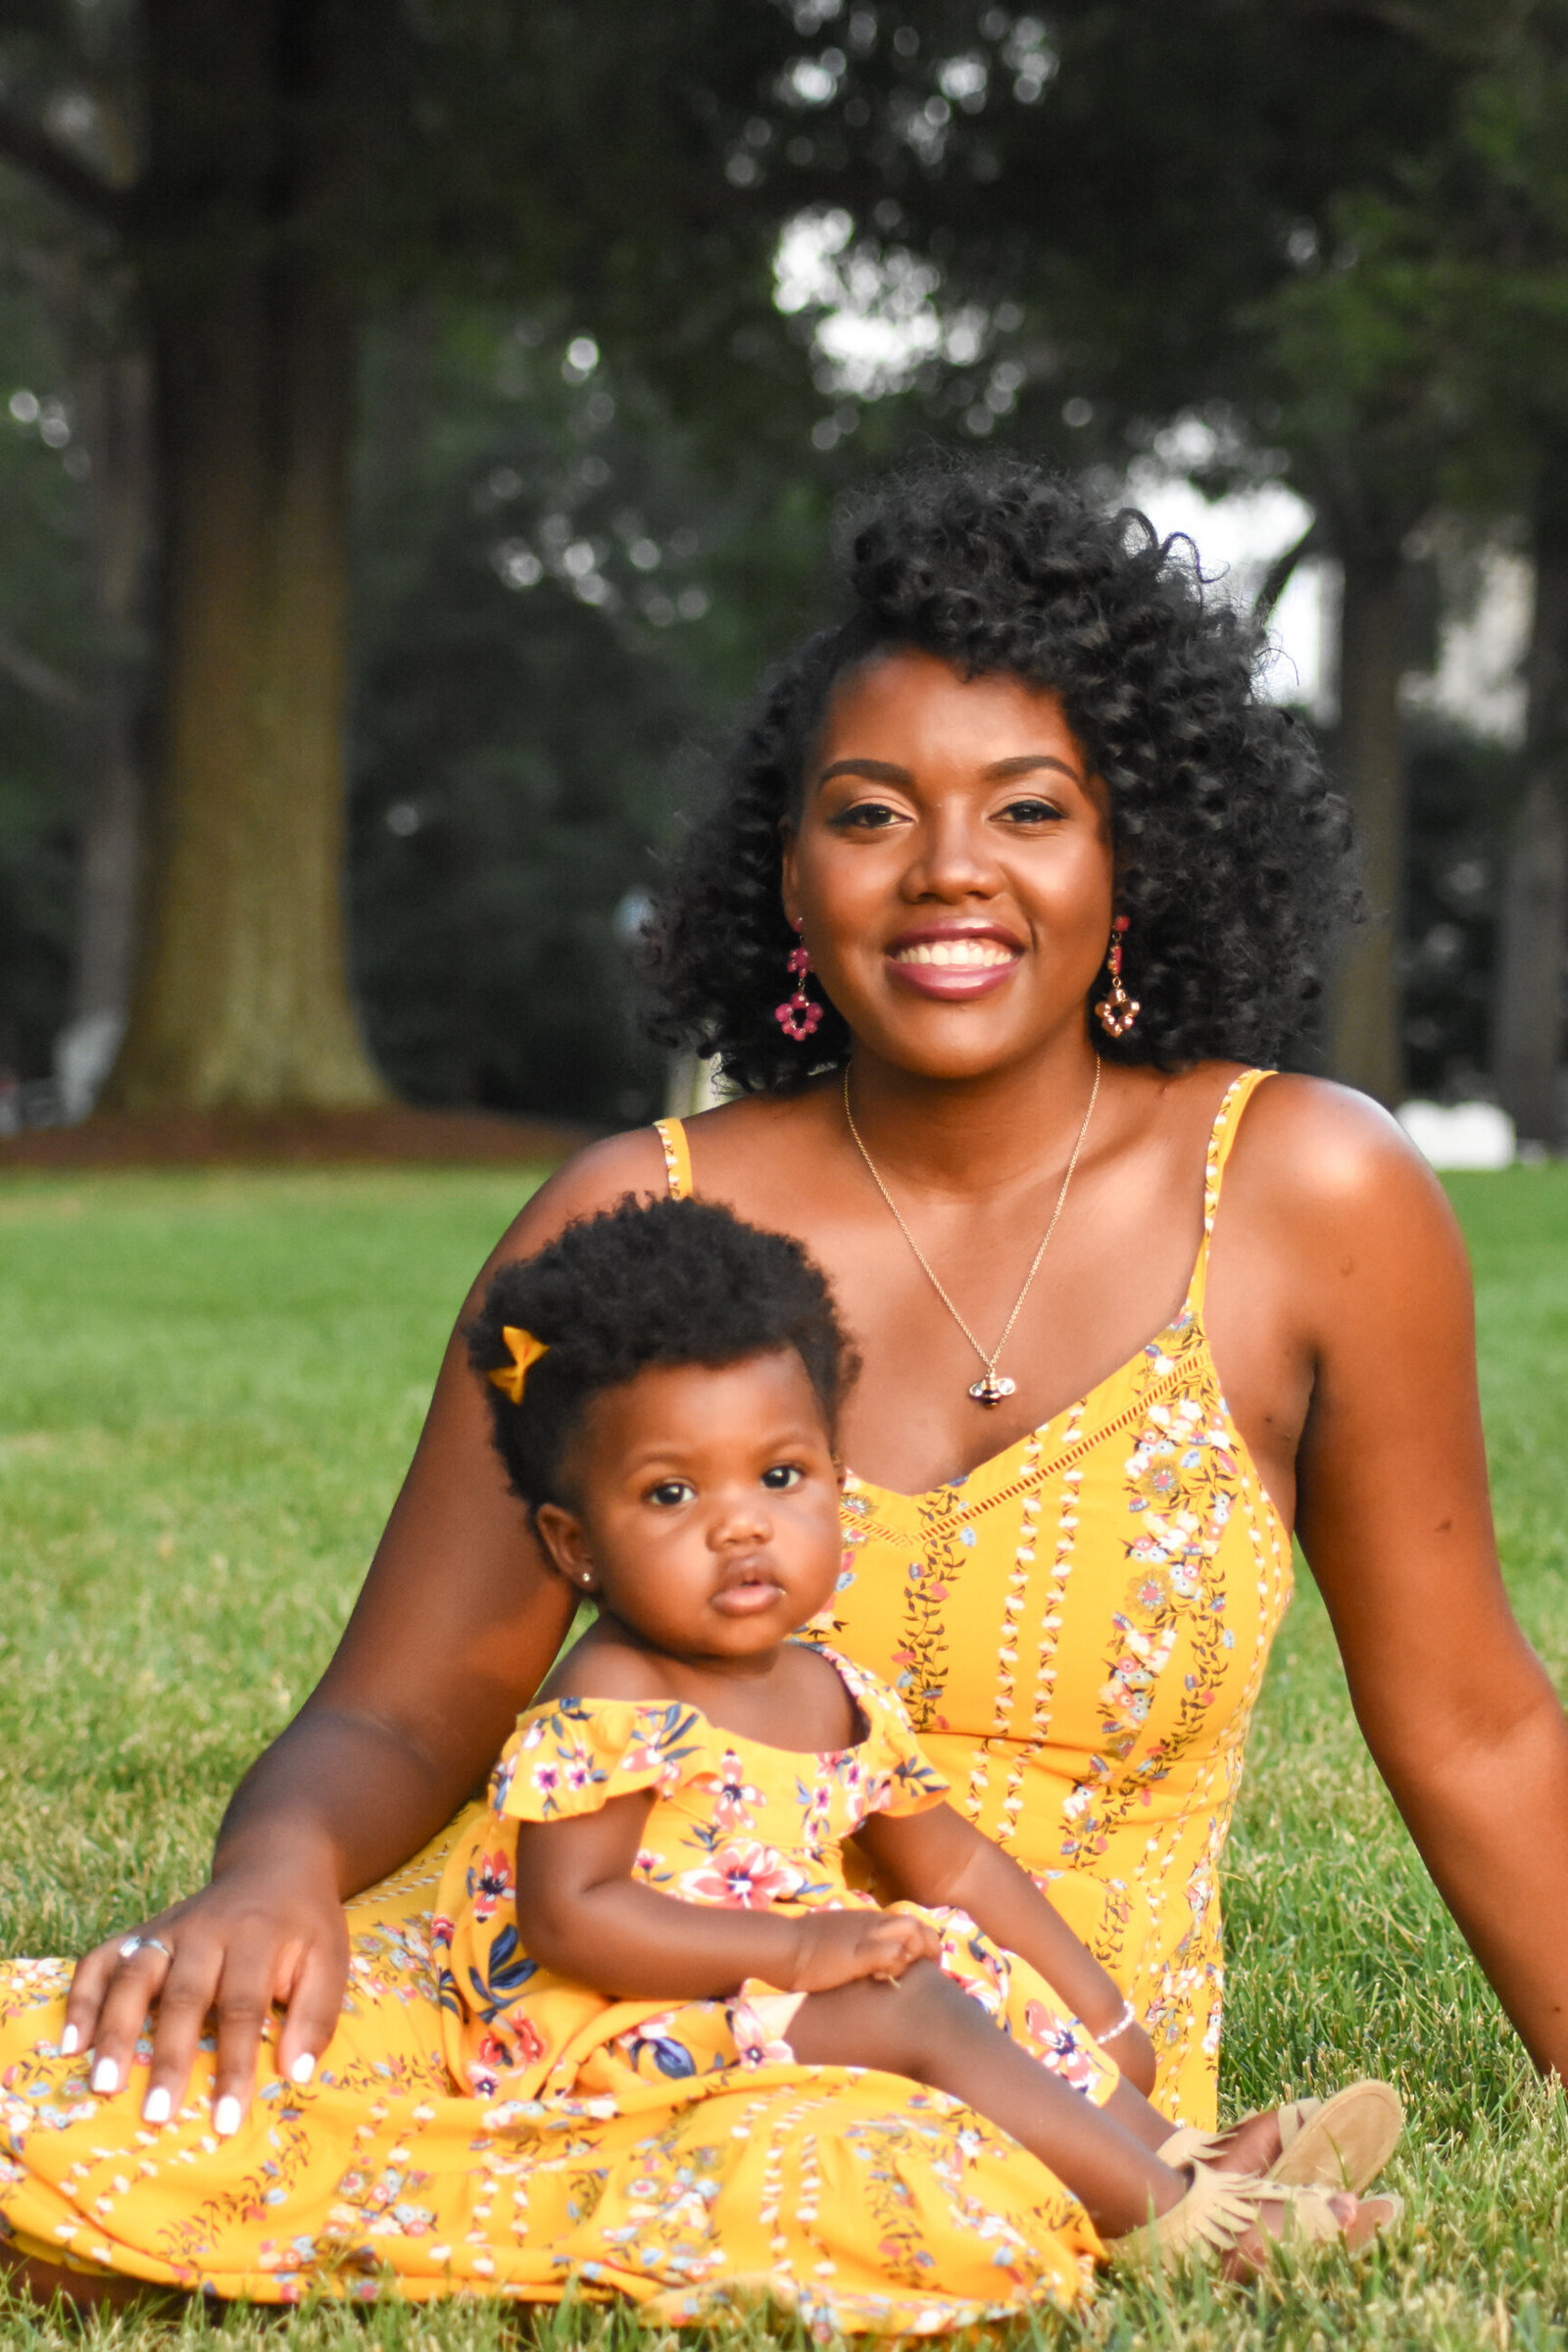 a mother and her daughter in matching yellow dresses posing for a photo in the gross photographed by Millz Photography in Greenville, SC